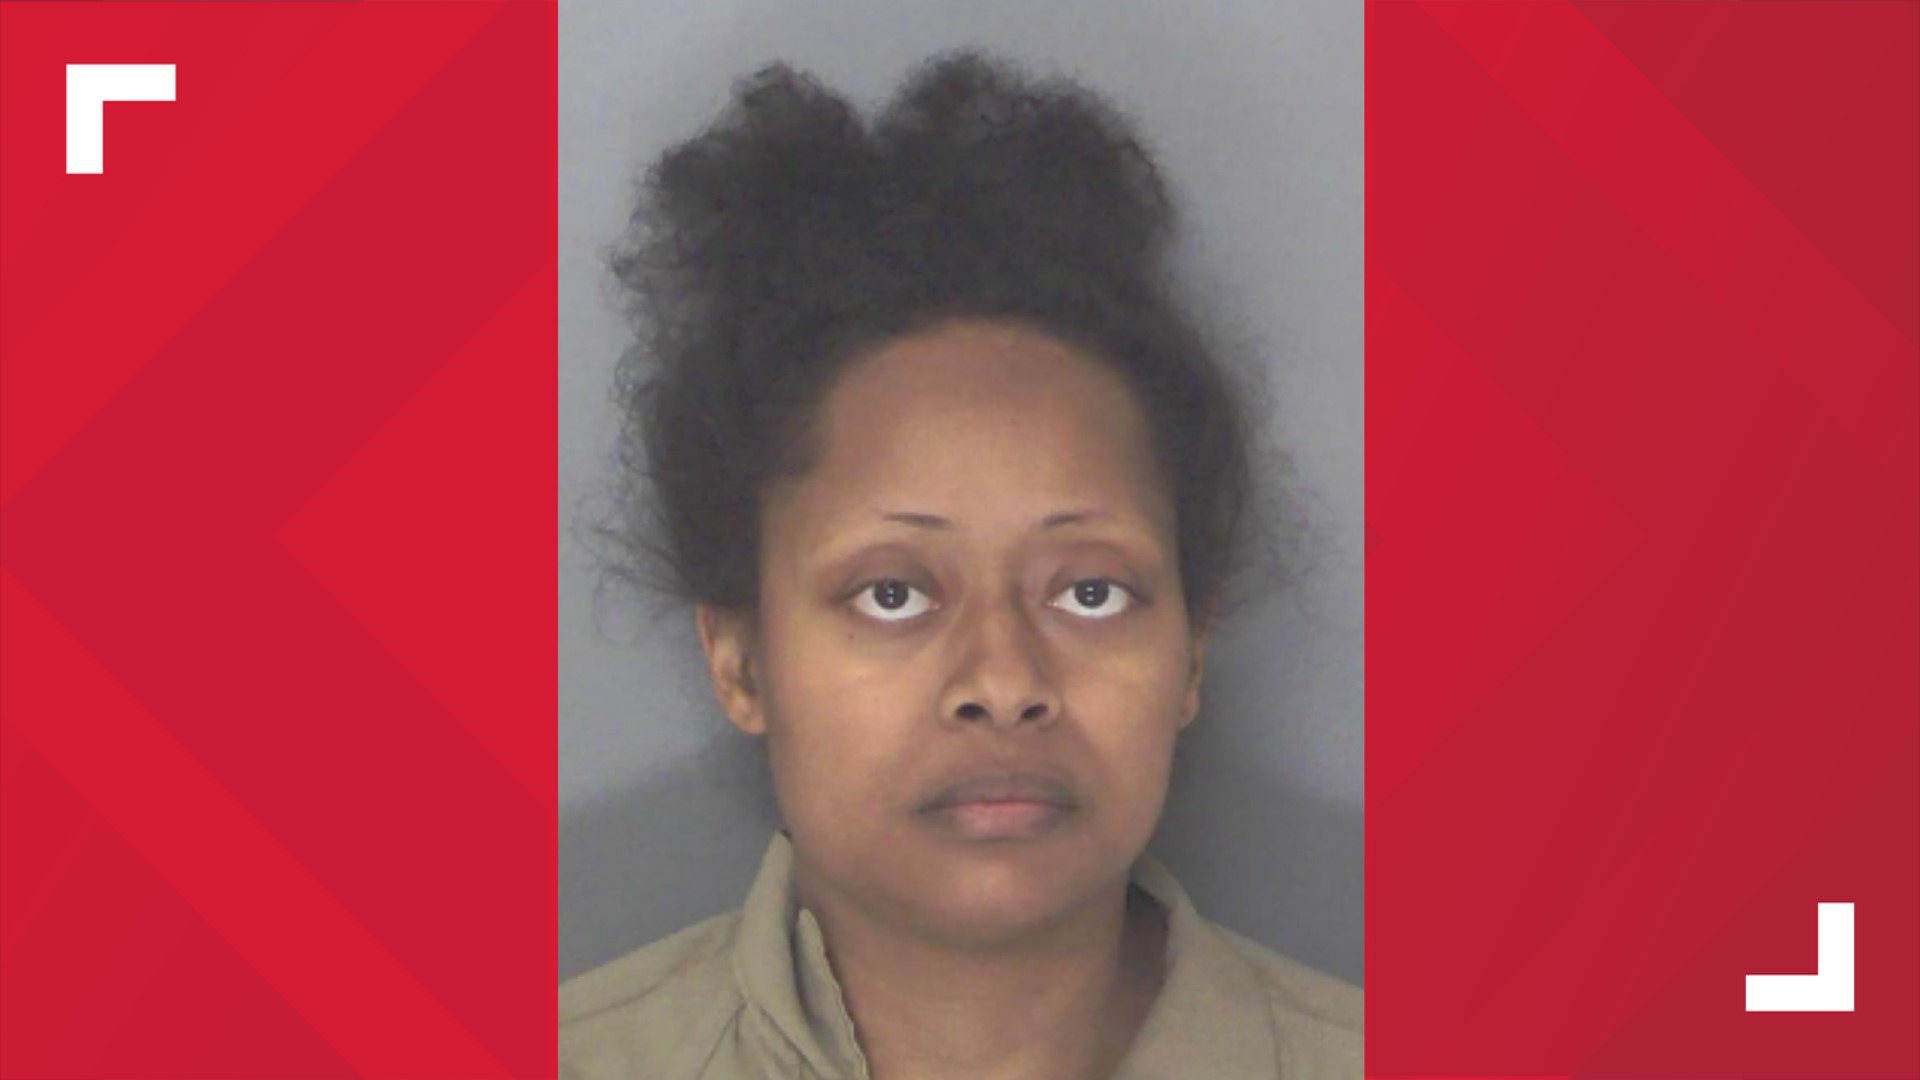 A Douglasville mother was arrested and charged with murder in the death of her 3-year-old child from "exposure to the elements," according to the sheriff's office.